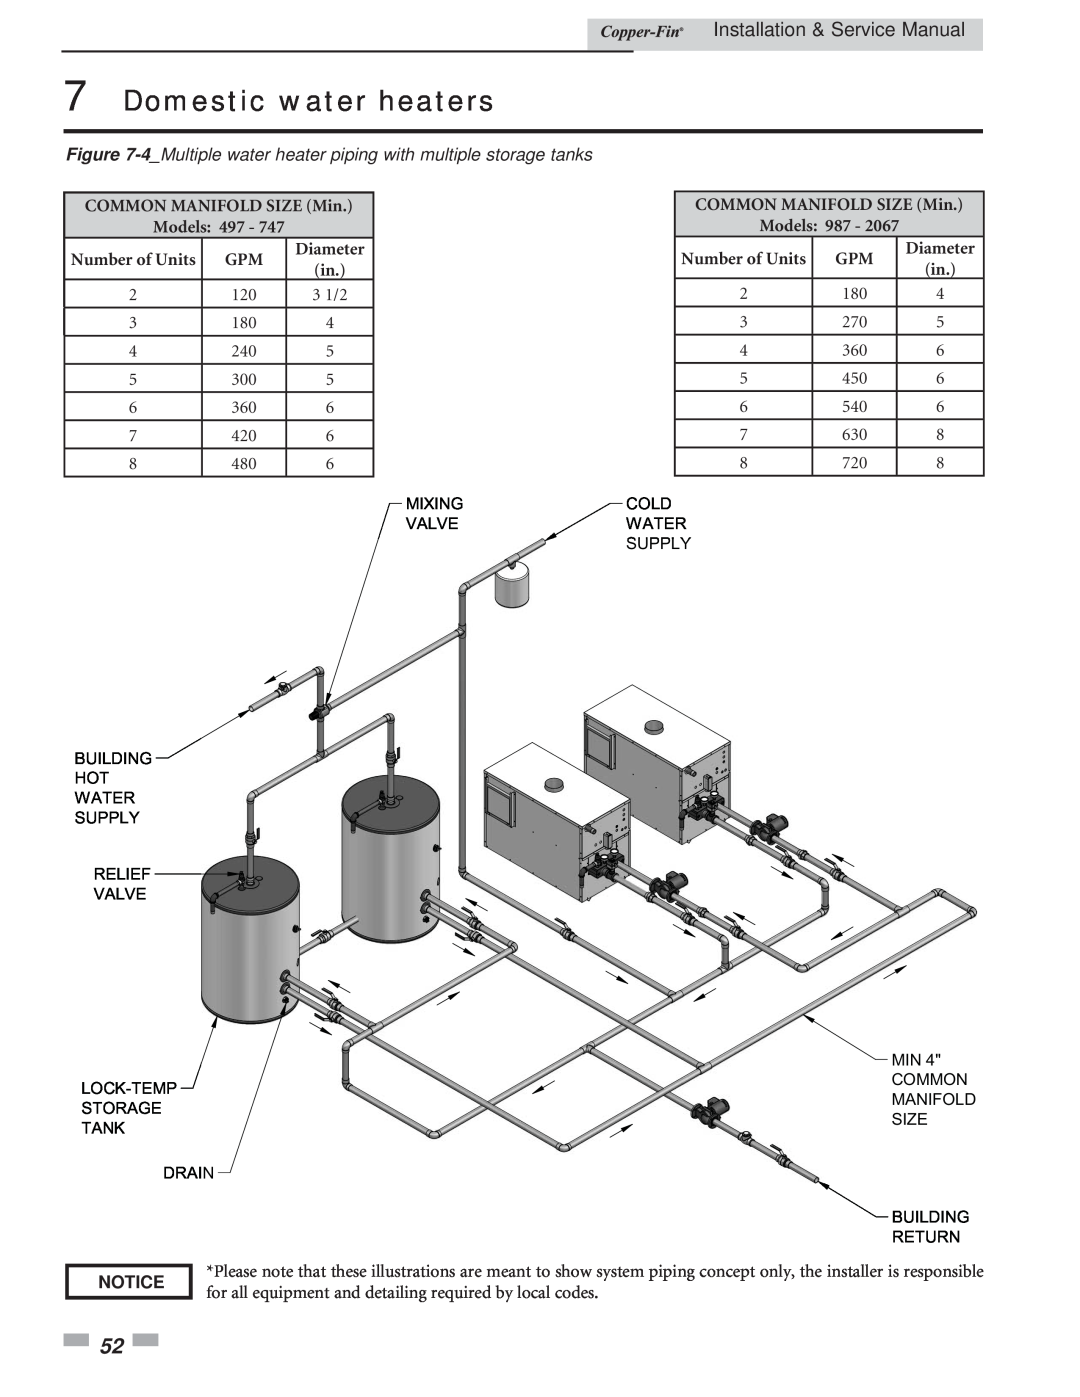 Lochinvar 497 - 2067 Domestic water heaters, Installation & Service Manual, Notice, Building Hot Water Supply Relief Valve 